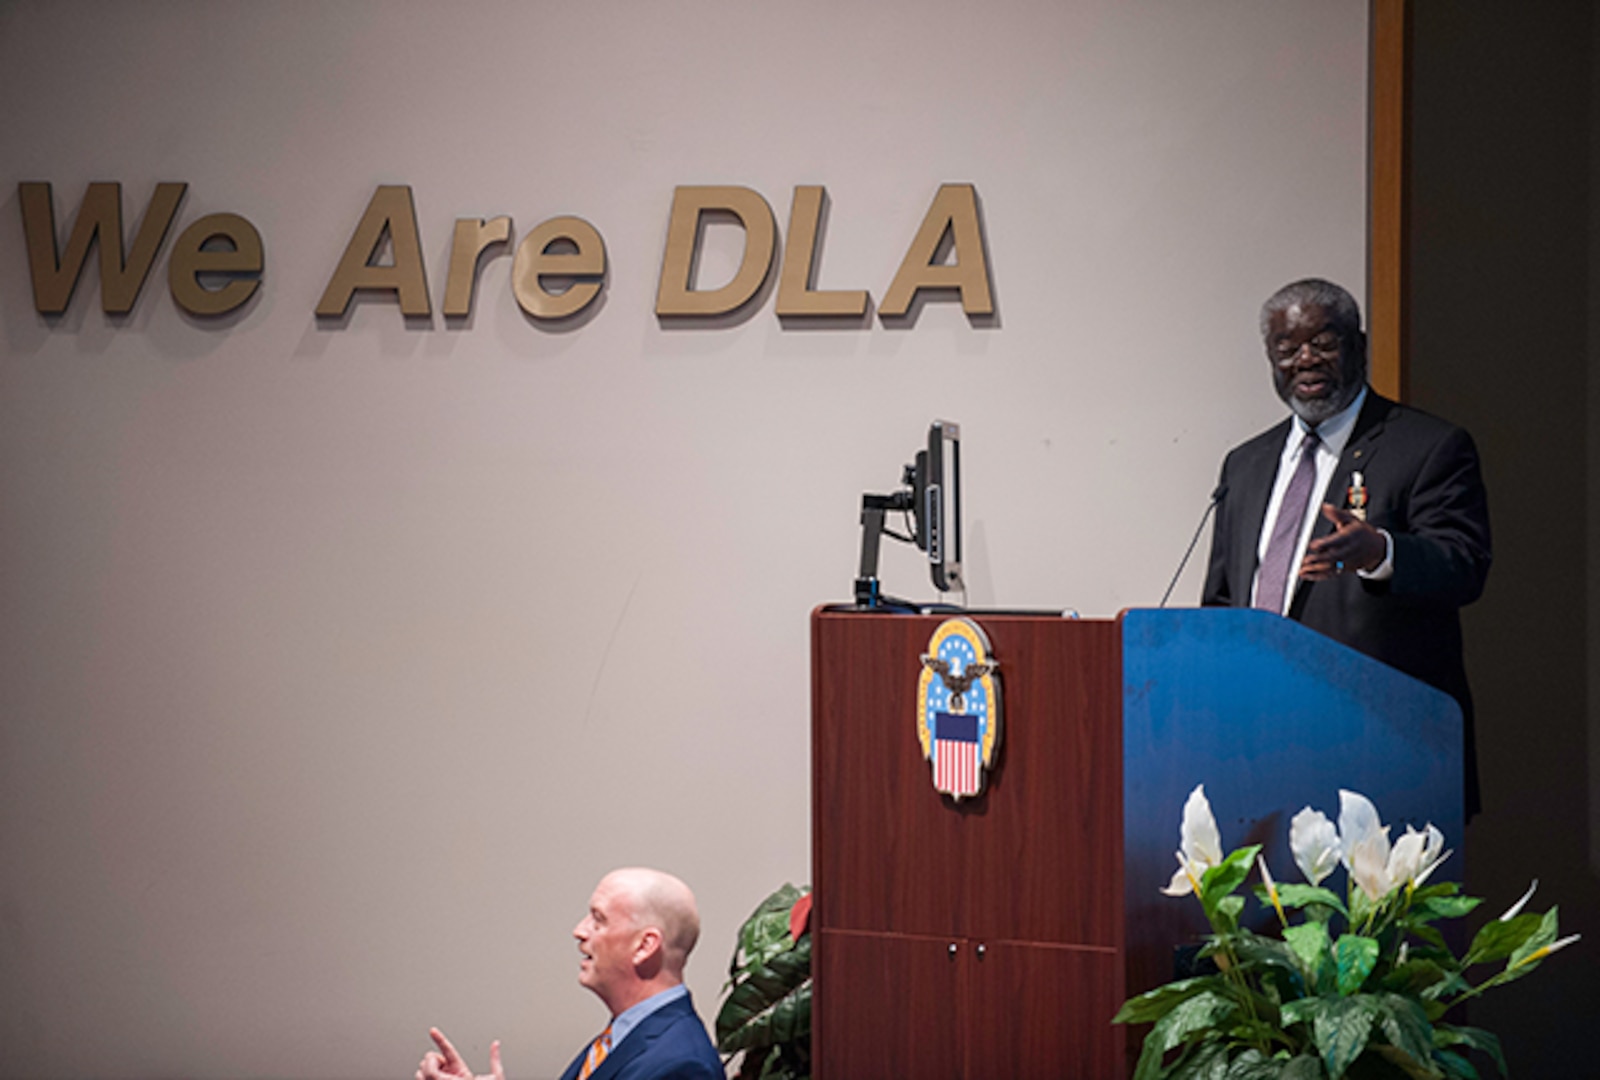 Milton Lewis, Acquisition Executive at DLA Land and Maritime, reminisced about assignments and experiences during his career during a March 31 retirement ceremony.